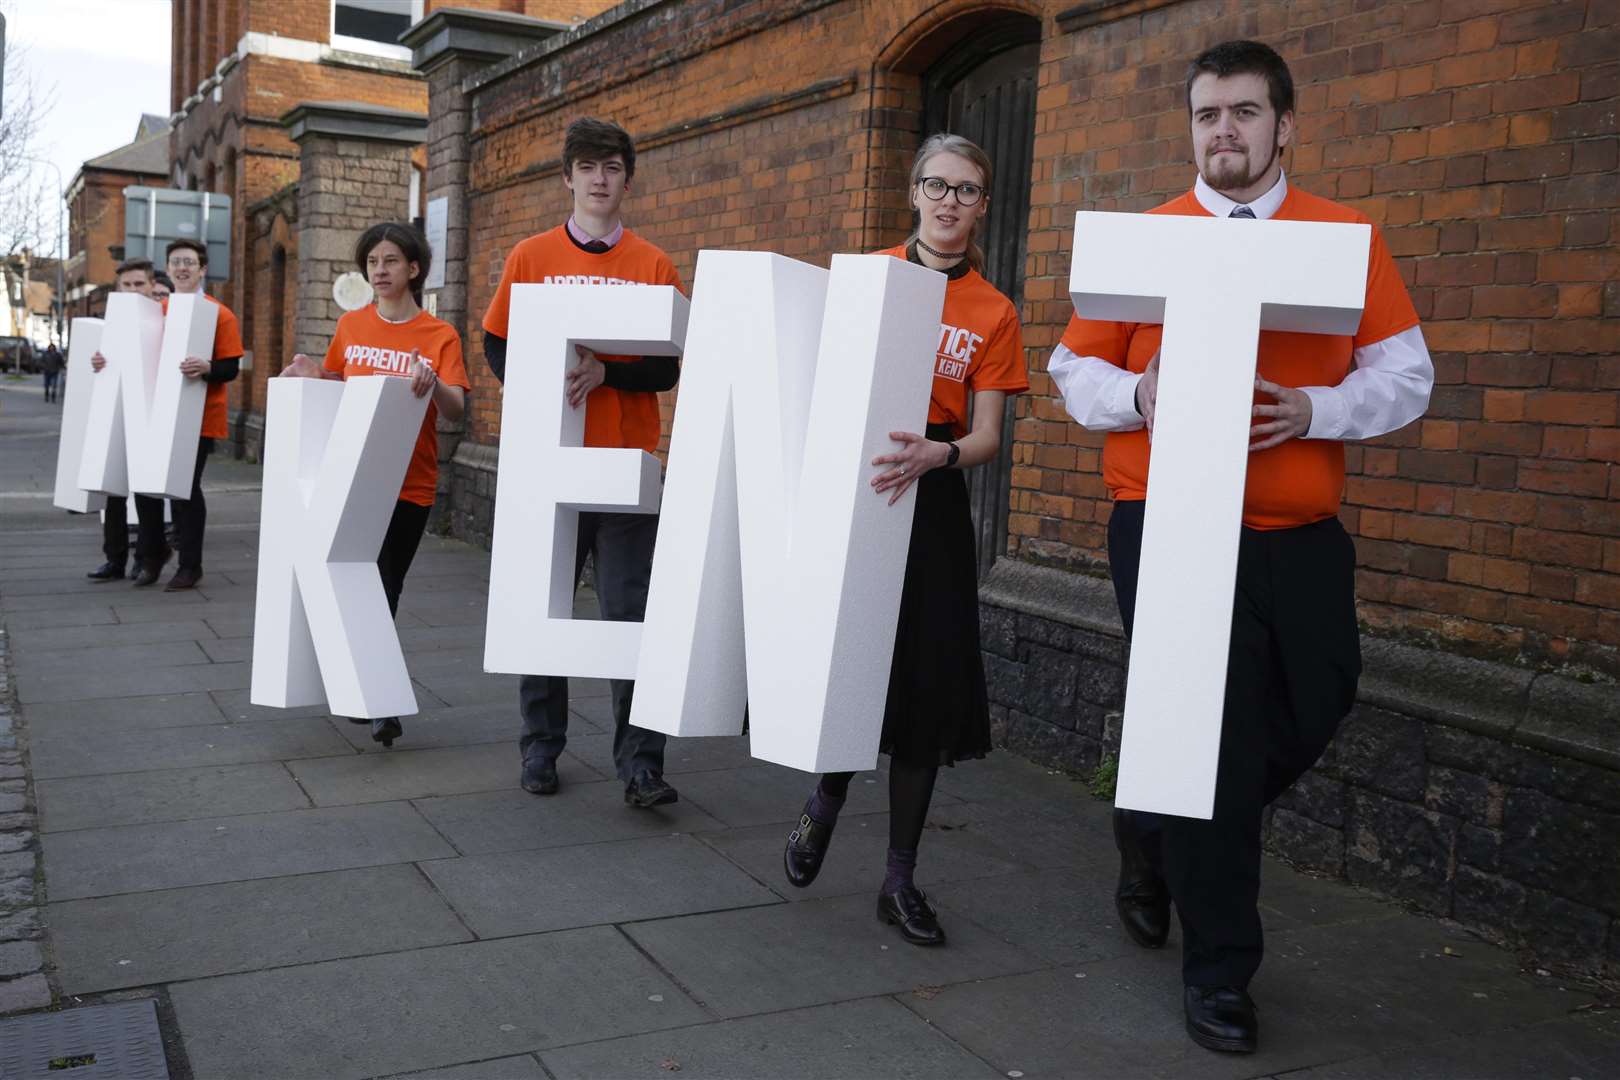 Apprentices carried letters bearing the name "Made In Kent" to launch a campaign by Kent County Council